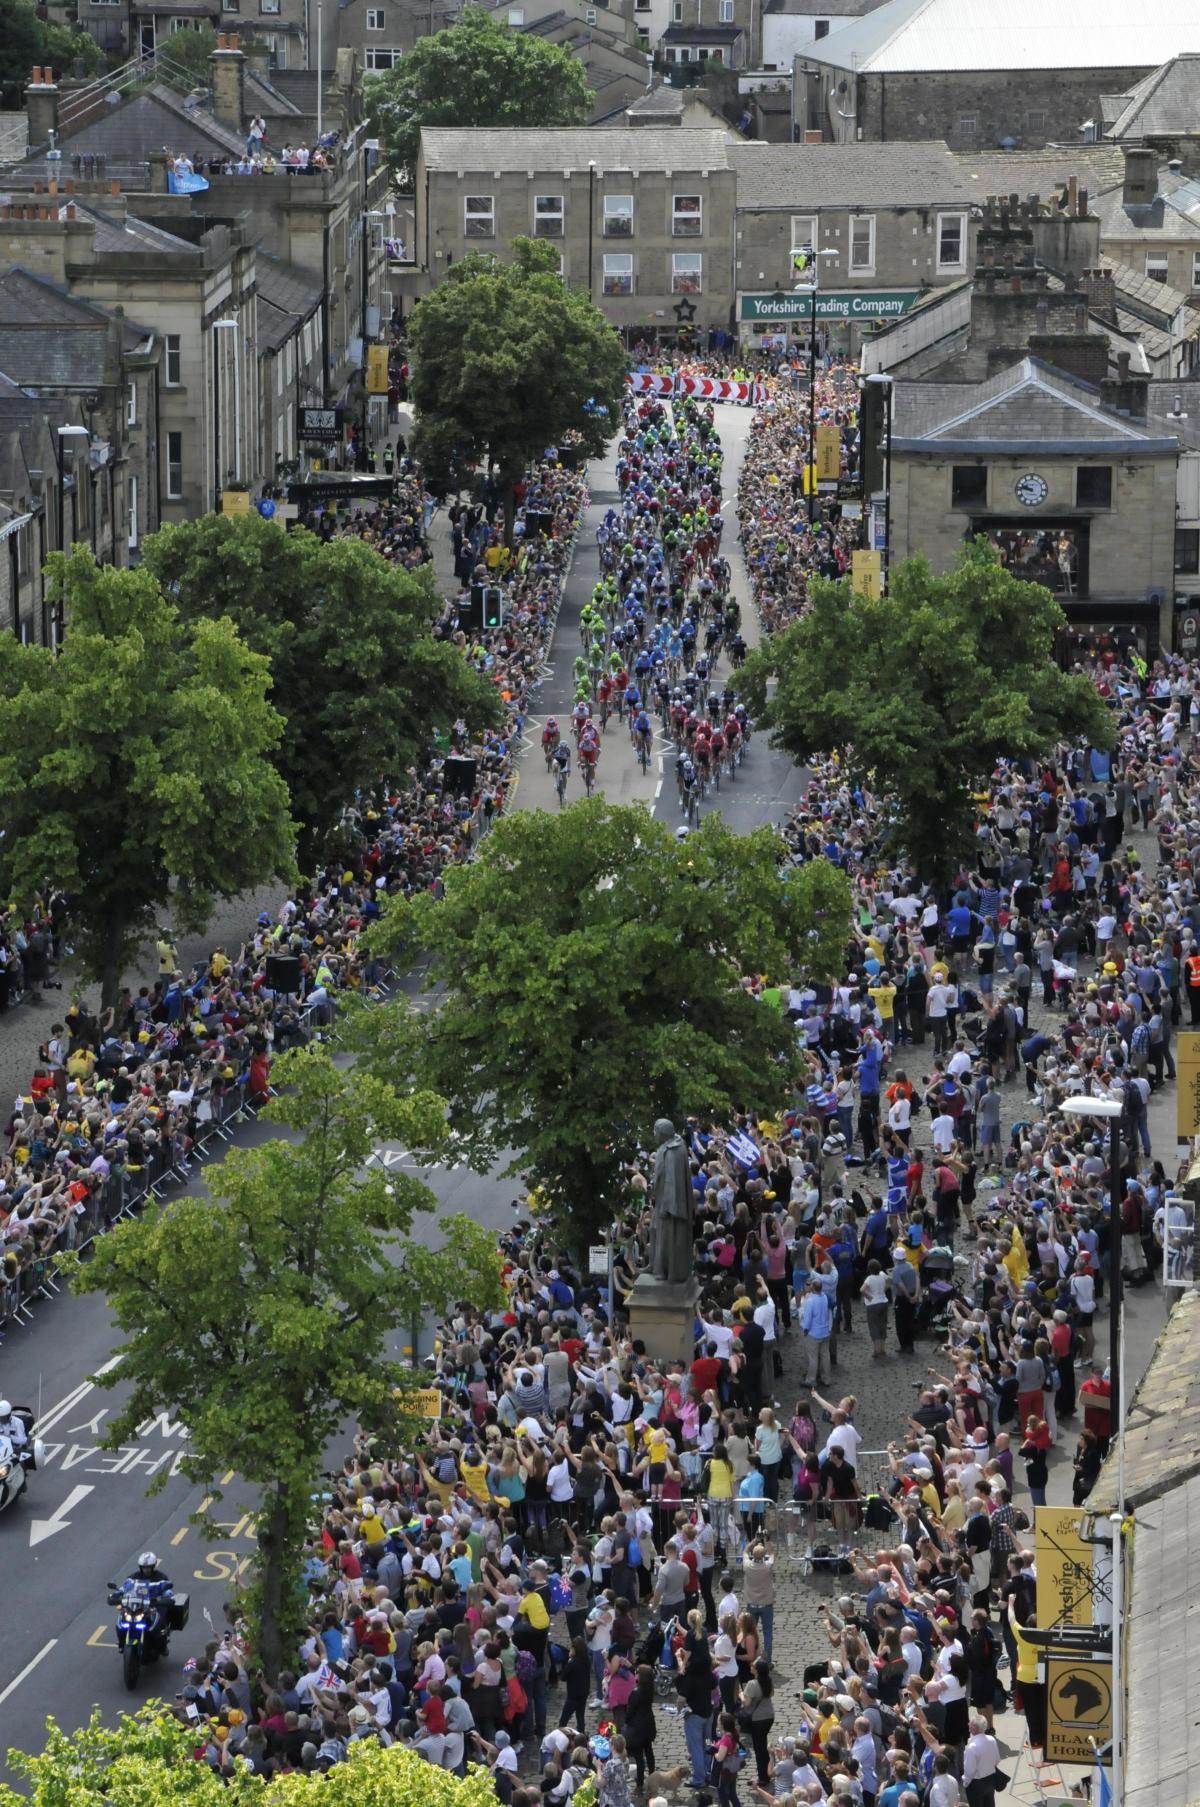 The view from the tower of Holy Trinity Parish Church of the Tour riders in Skipton's High Street. 